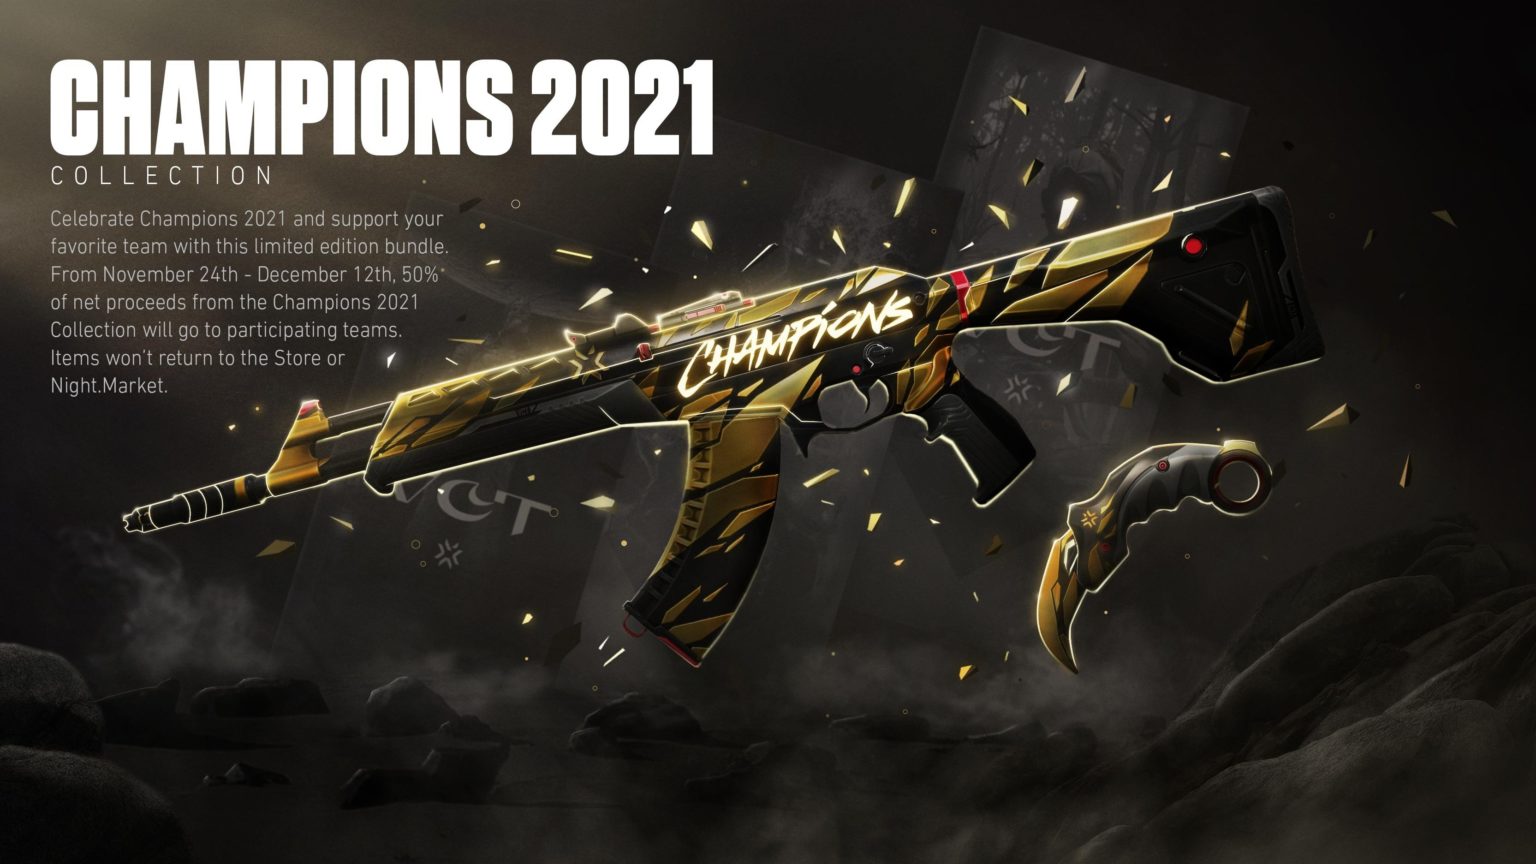 valorant champions 2021 costume package has been announced.